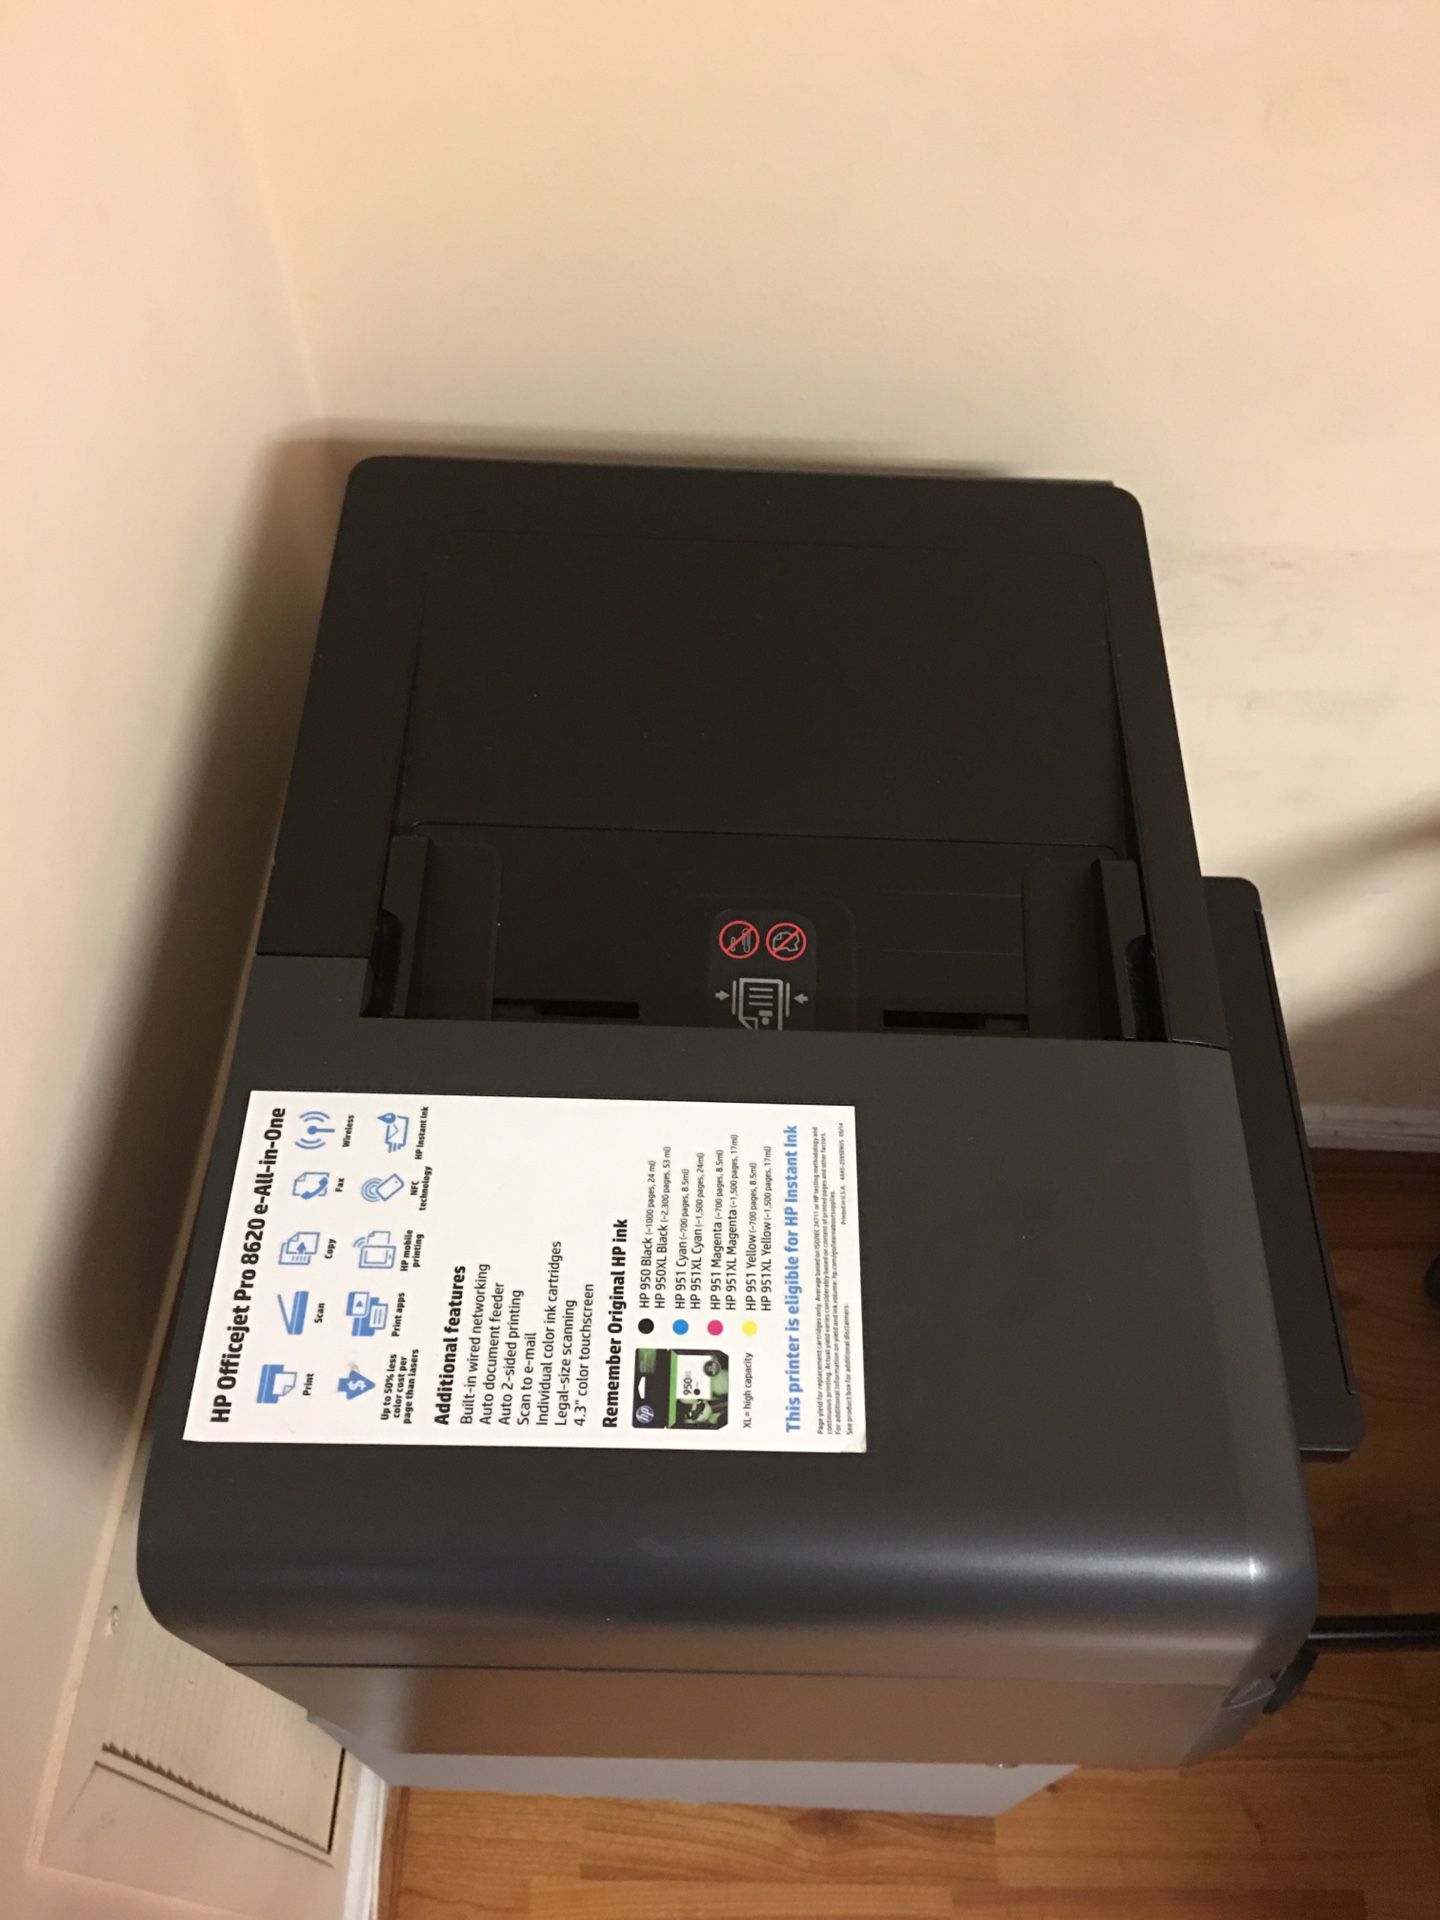 HP Officejet Pro 8620 All in one Printer (Excellent Condition)